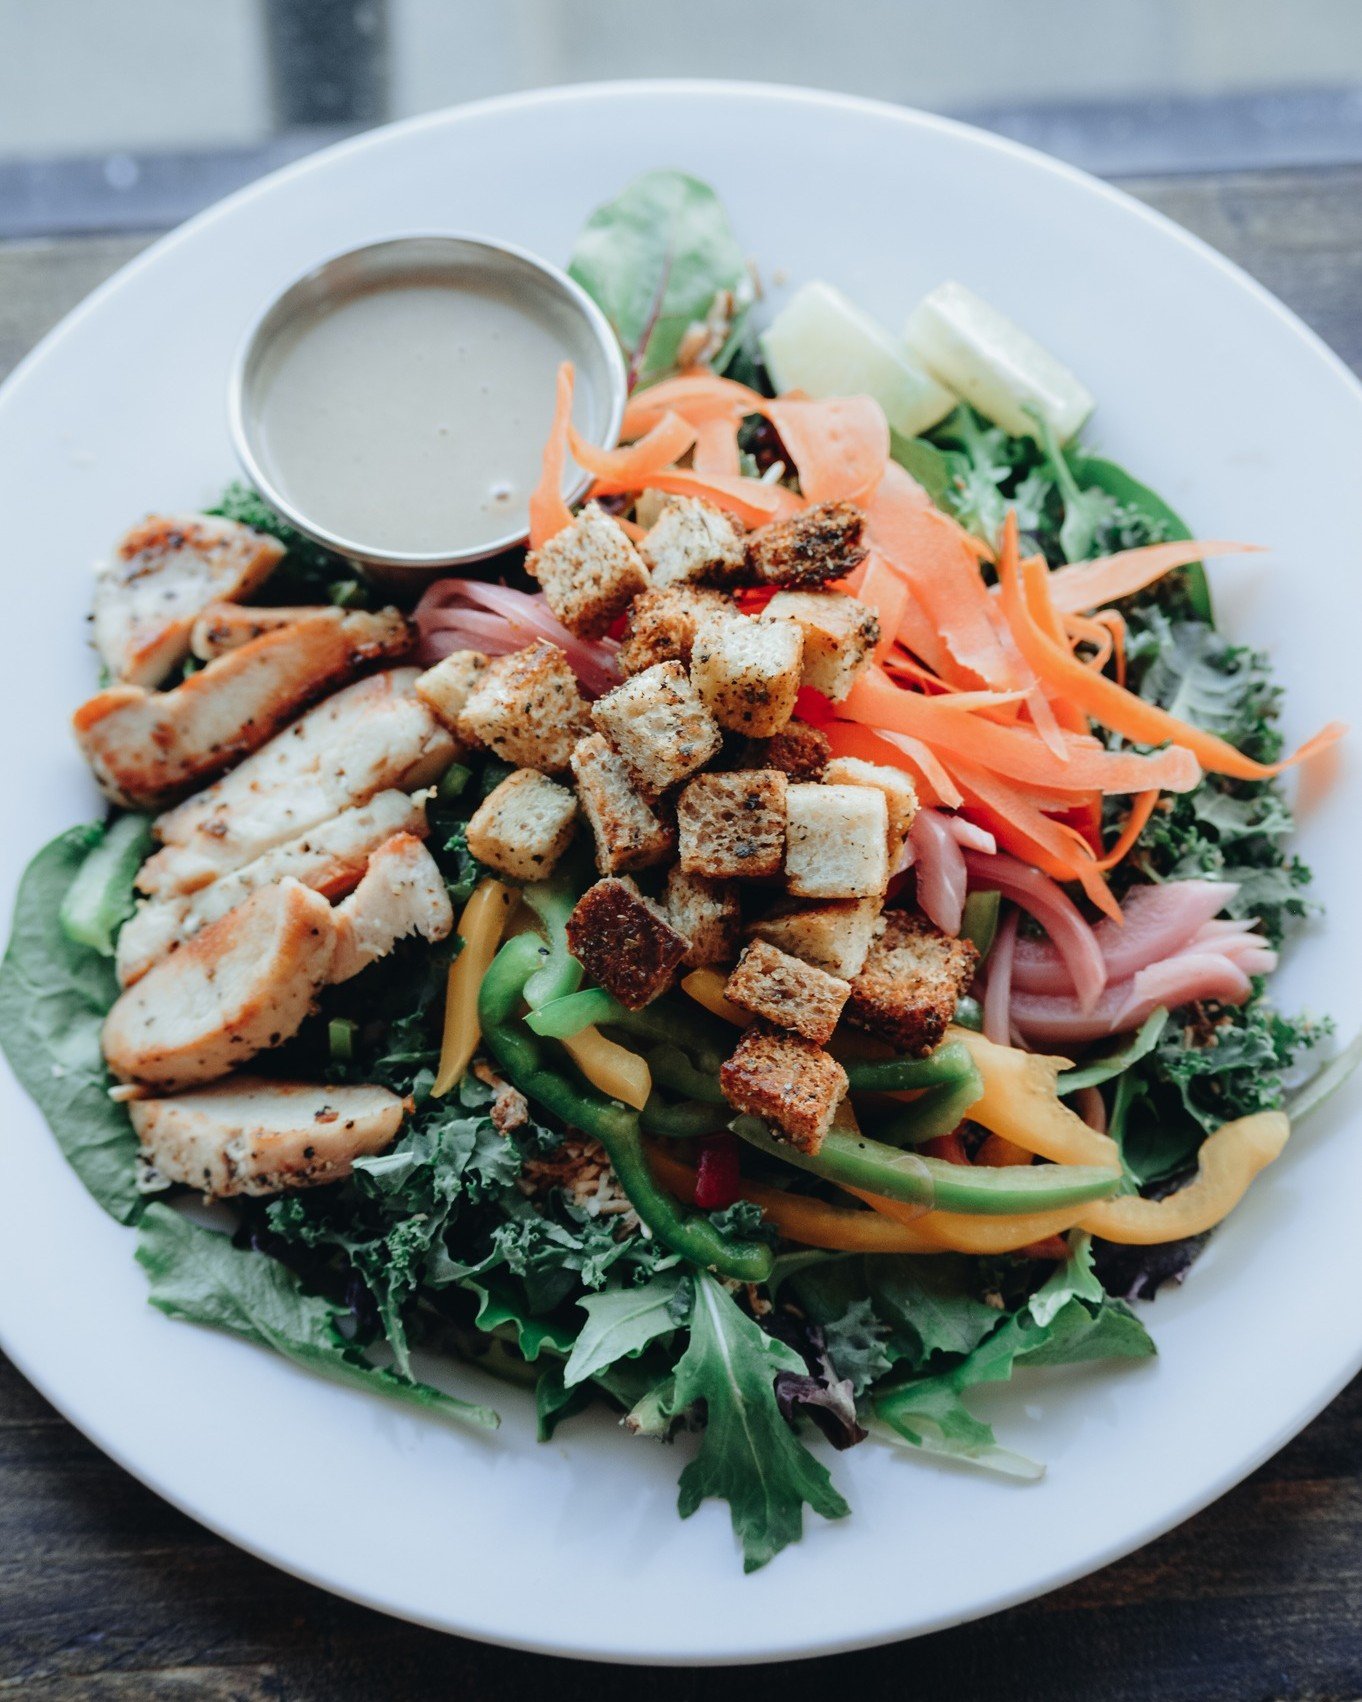 Try our delicious Thai Coconut Chicken Salad! Packed with greens, kale, chicken, bell pepper, and carrots, it also features toasted coconut for a tropical twist. Enjoy pickled onions, sourdough croutons, and a zesty lime wedge. All topped with a savo